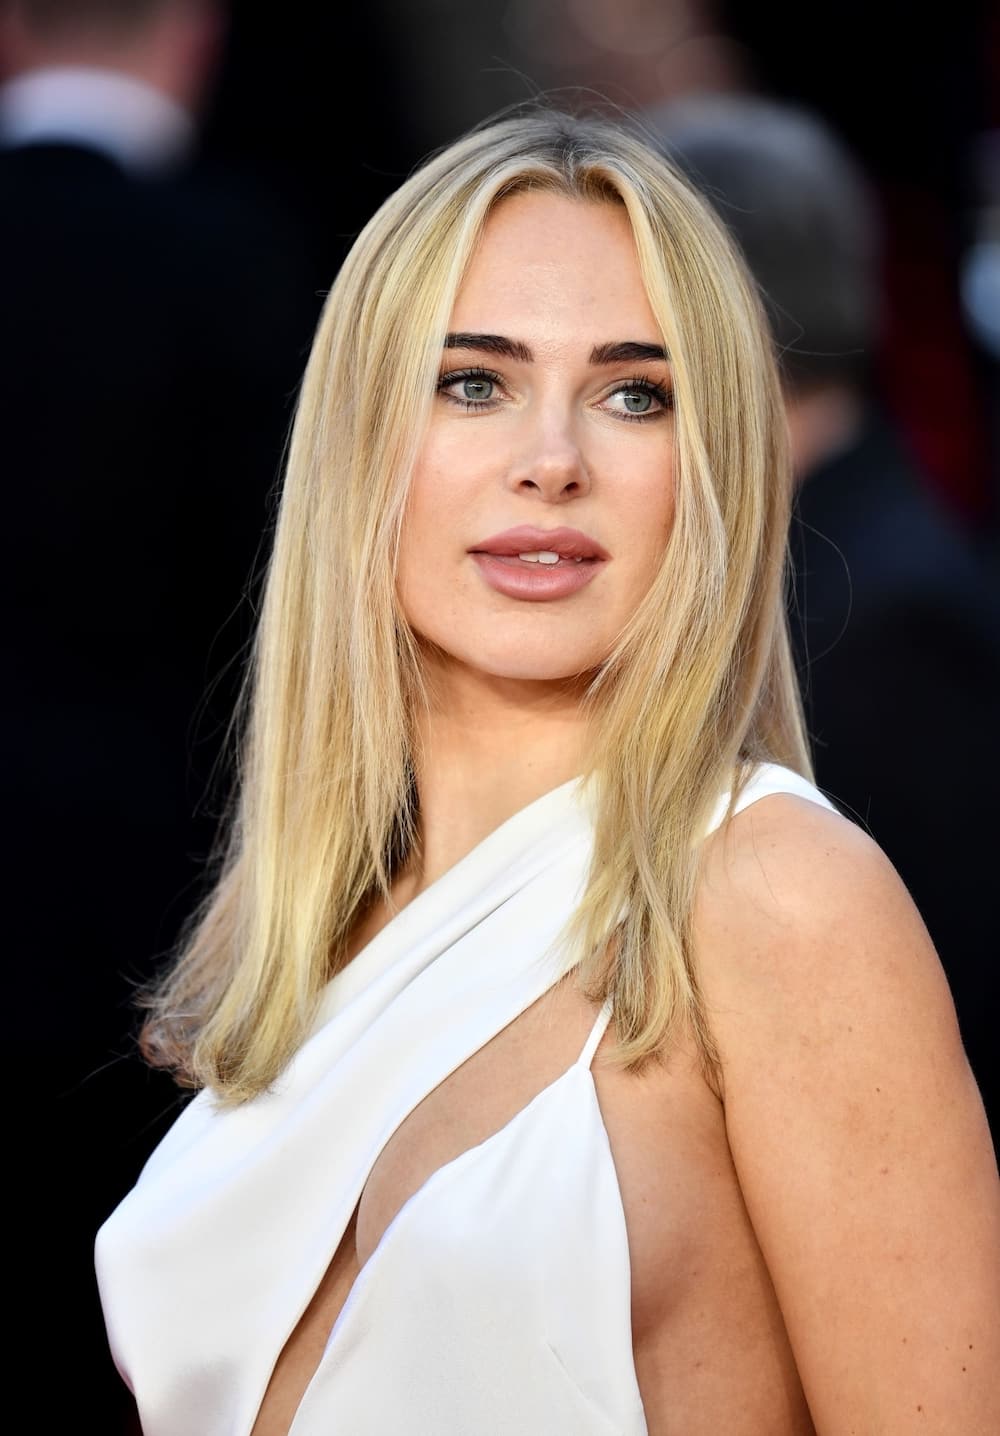 Kimberley Garner risked a wardrobe malfunction in a white cut-out gown on the red carpet for the ‘No Time To Die’ world premiere held at Royal Albert Hall, London on September 28, 2021.